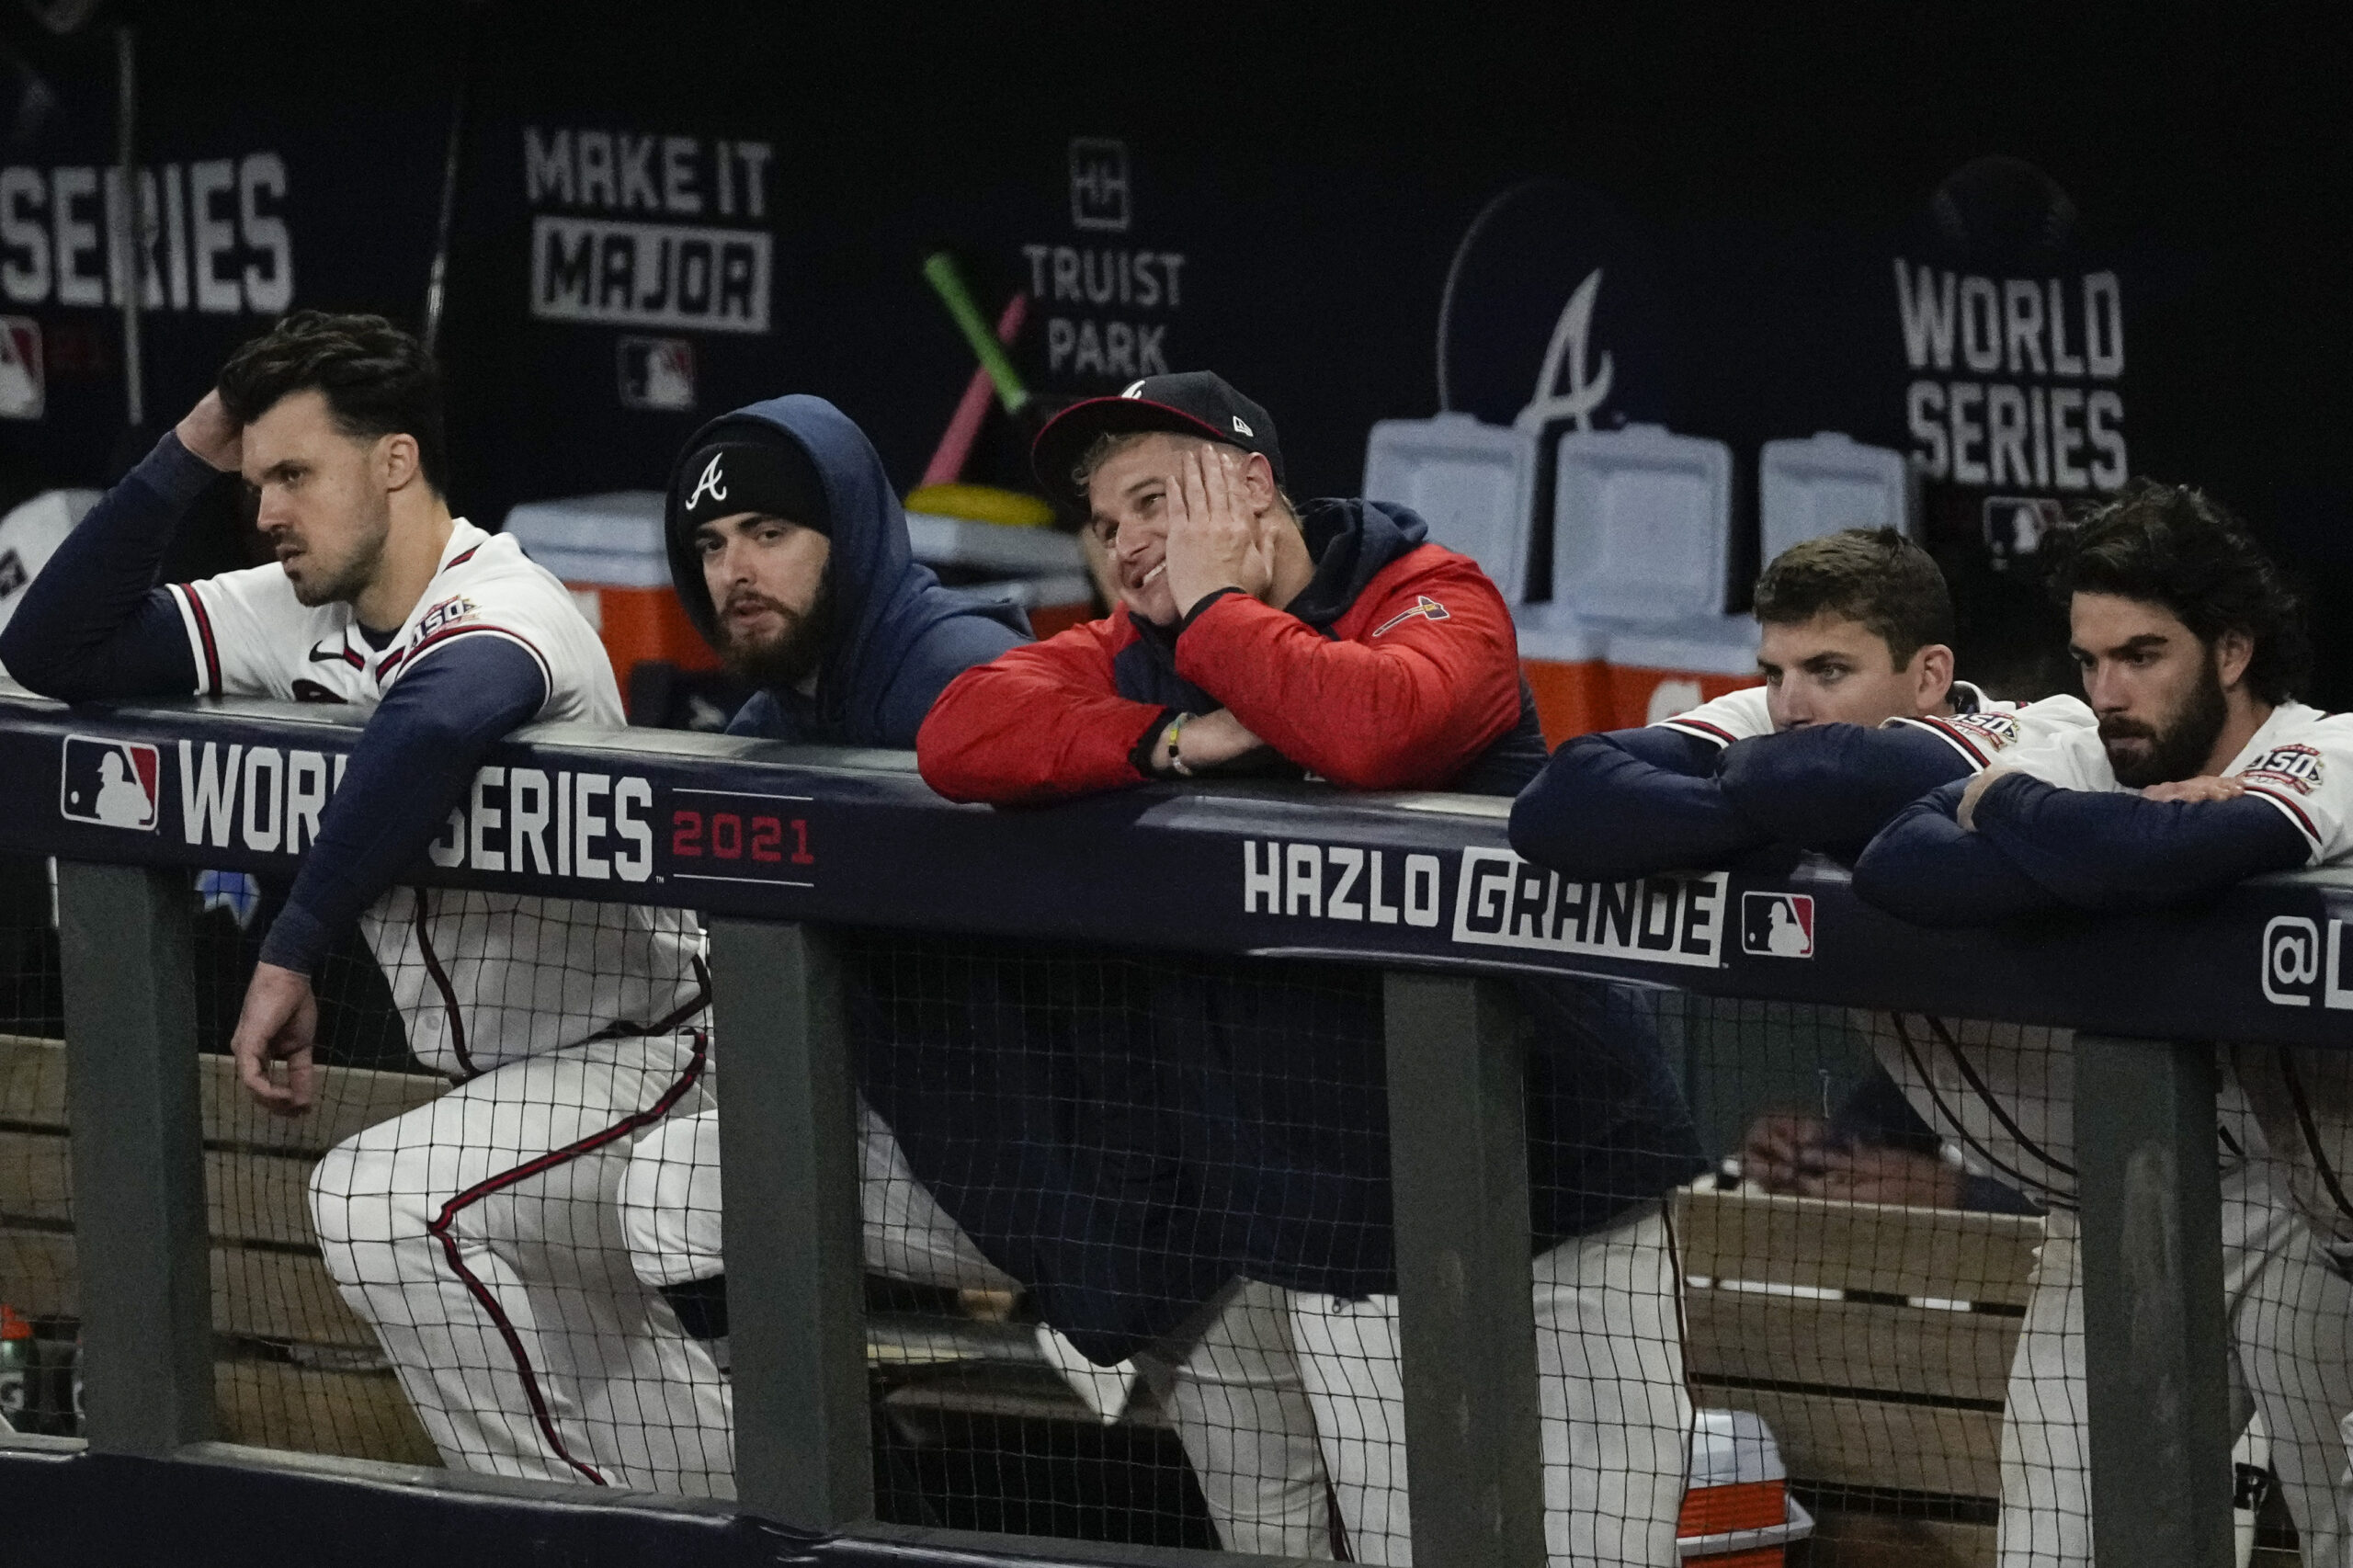 Members of the Atlanta Braves watch during the ninth inning in Game 5 of baseball's World Series between the Houston Astros and the Atlanta Braves Monday, Nov. 1, 2021, in Atlanta. The Astros won 9-5. The Braves lead the series 3-2 games. (AP Photo/Ashley Landis)